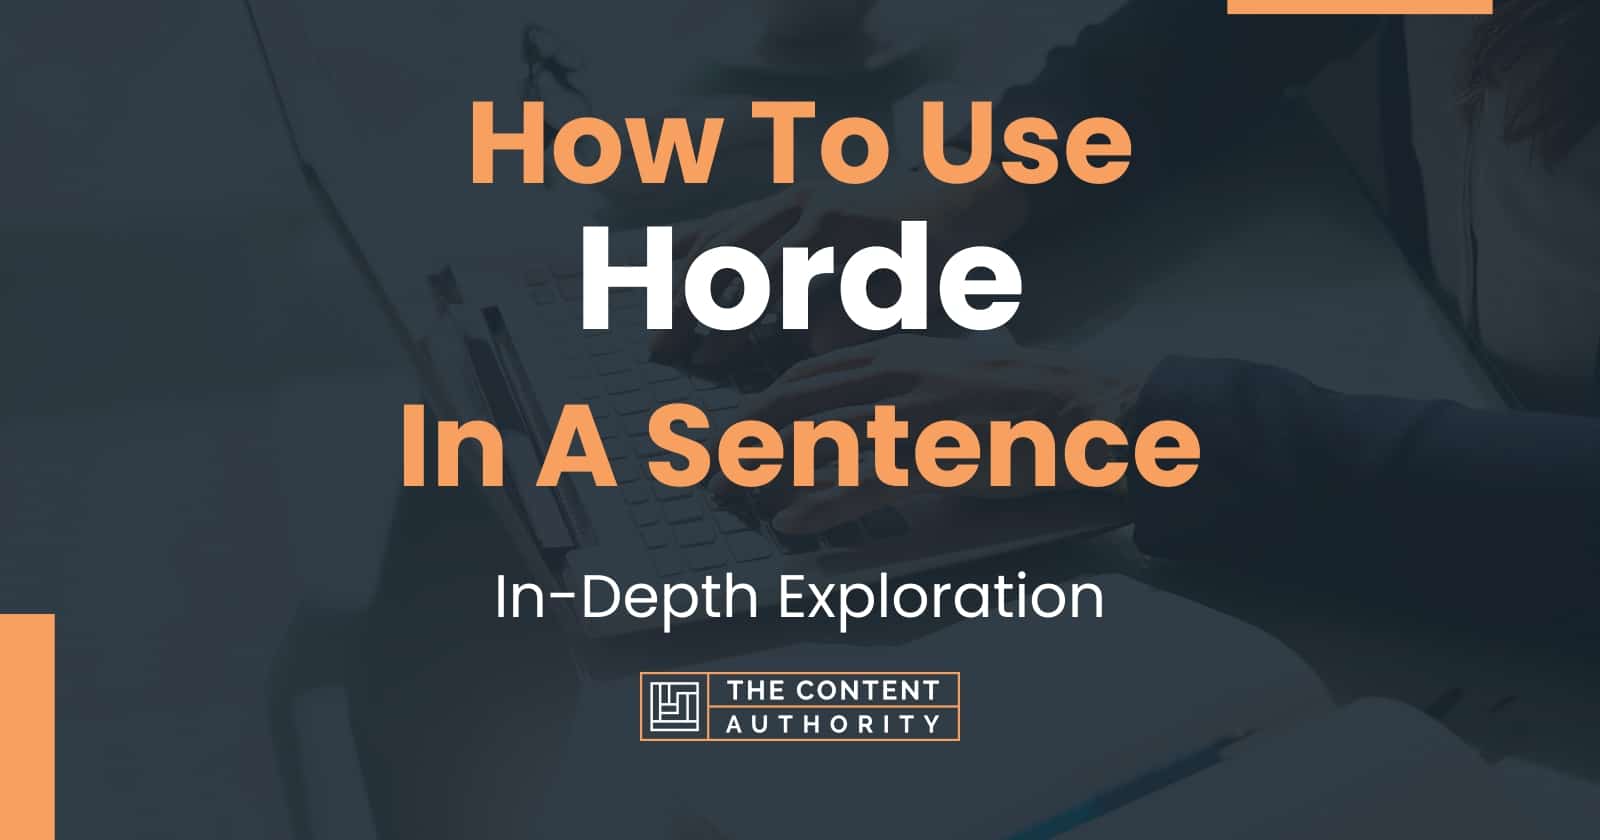 How to pronounce horde